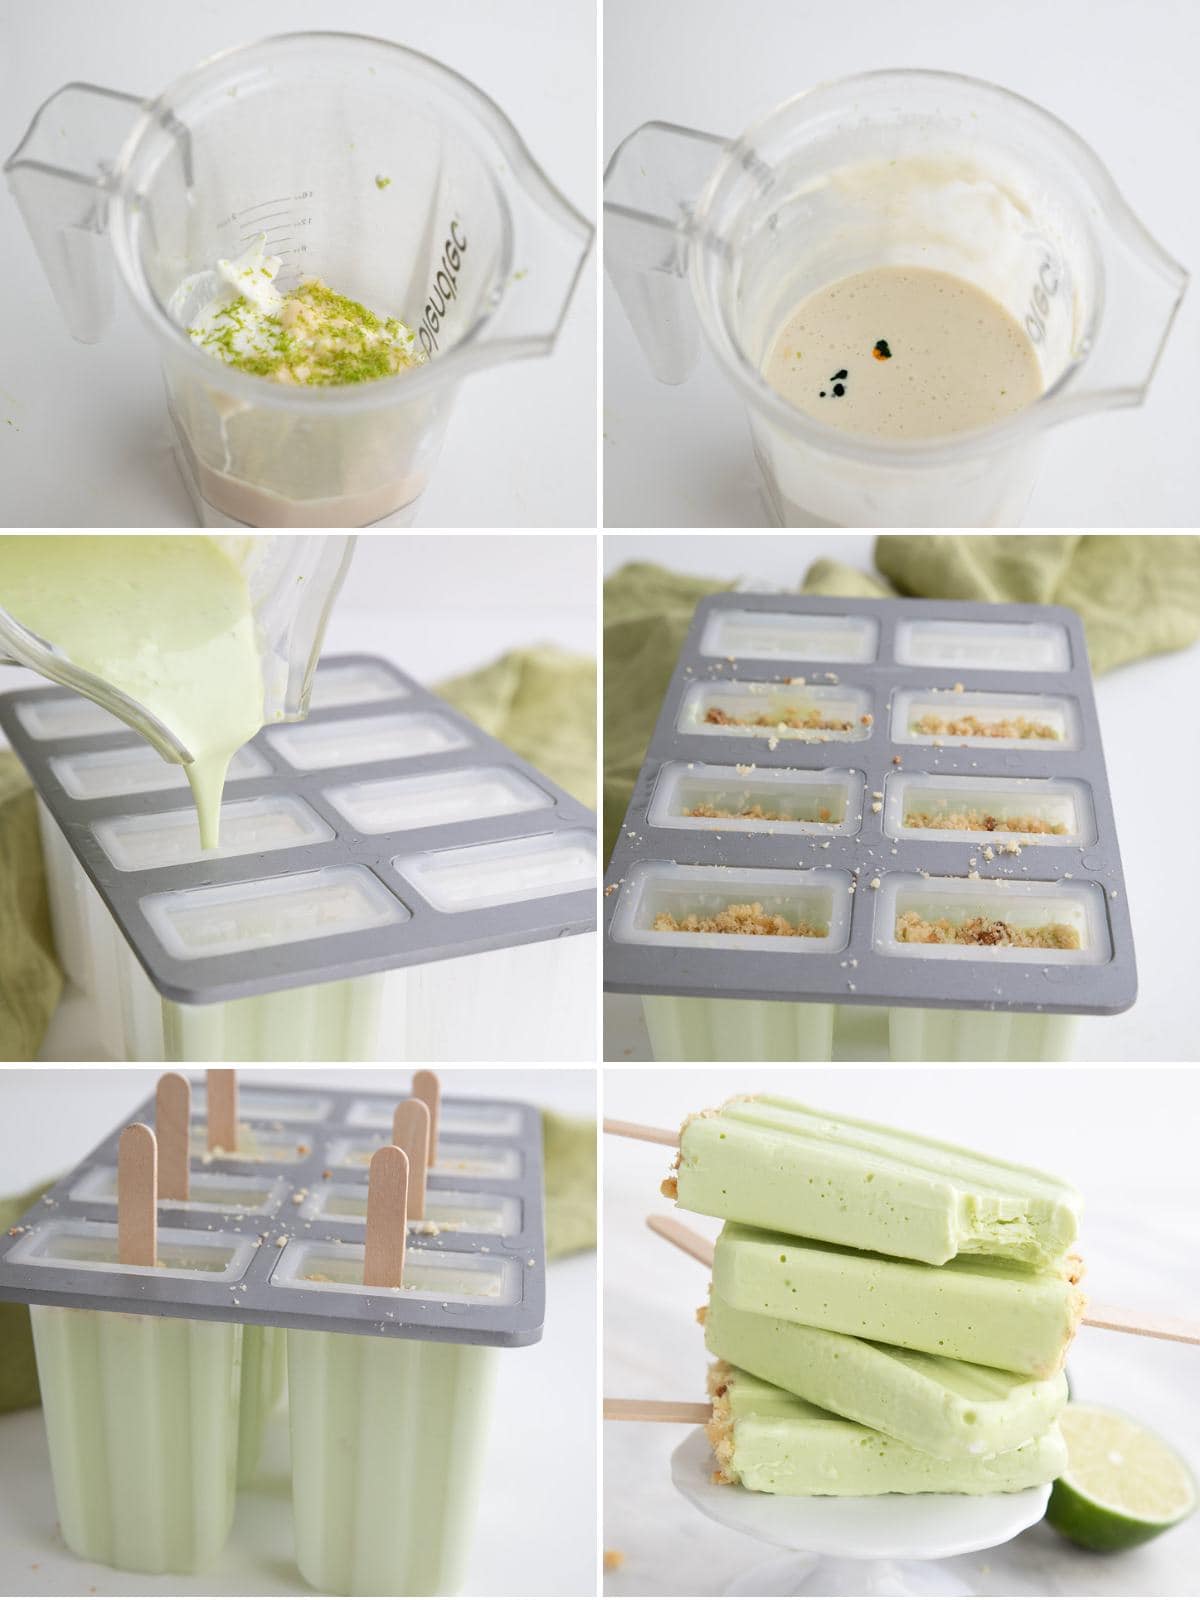 A collage of 6 images showing how to make Keto Key Lime Protein Popsicles.